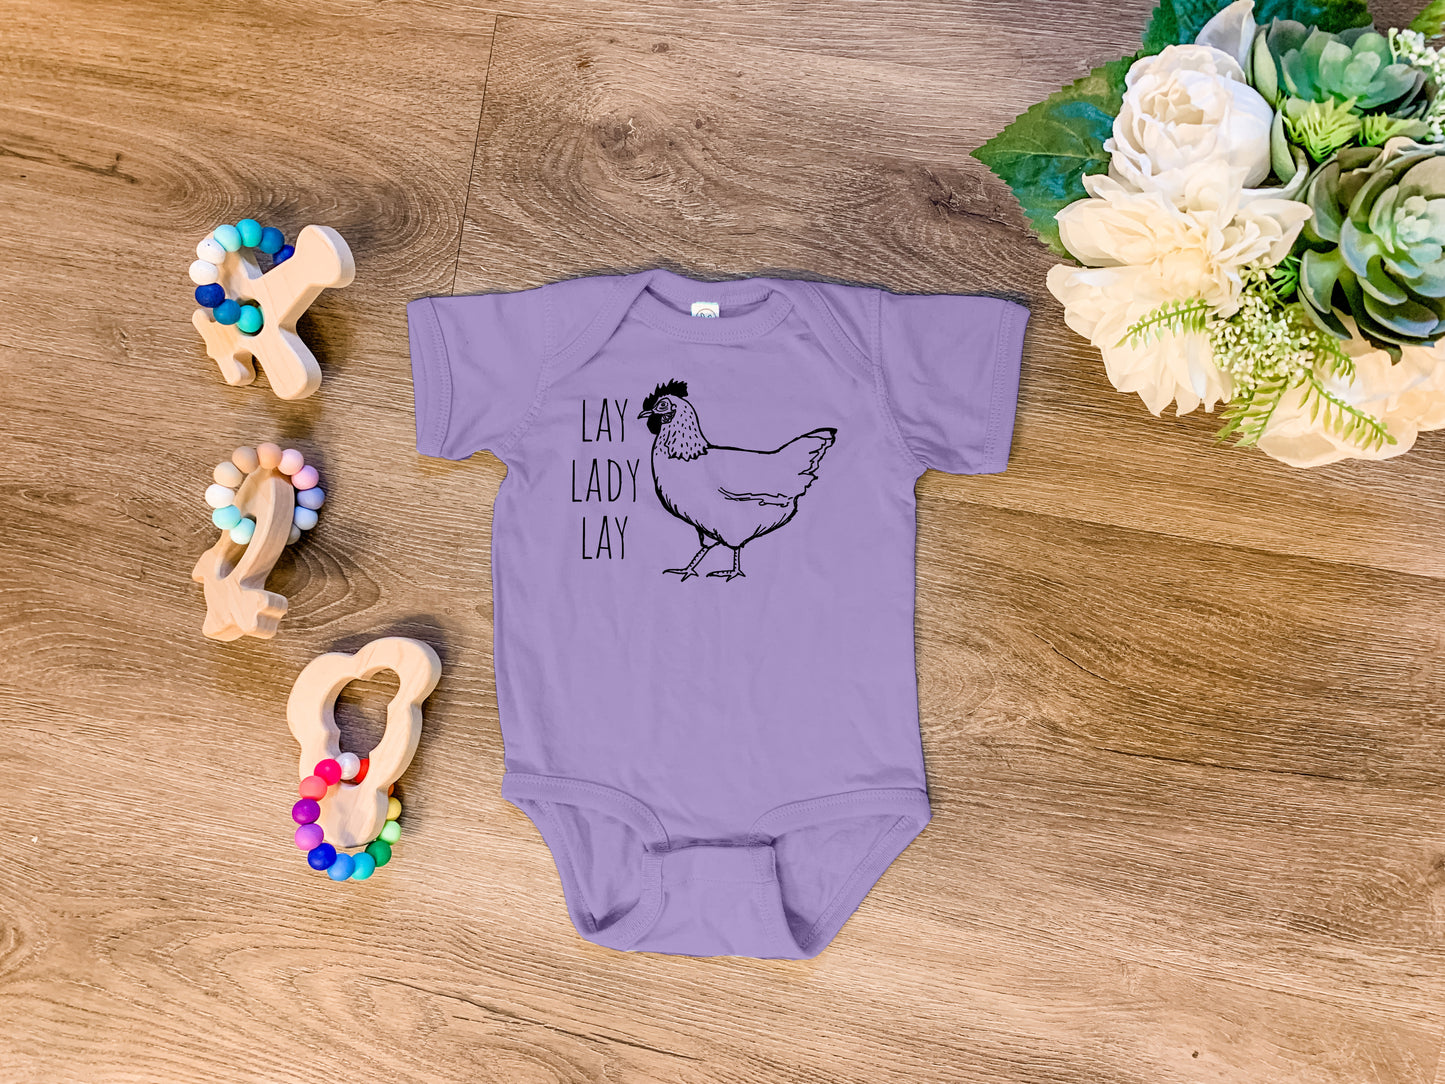 Lay Lady Lay (Chicken) - Onesie - Heather Gray, Chill, or Lavender